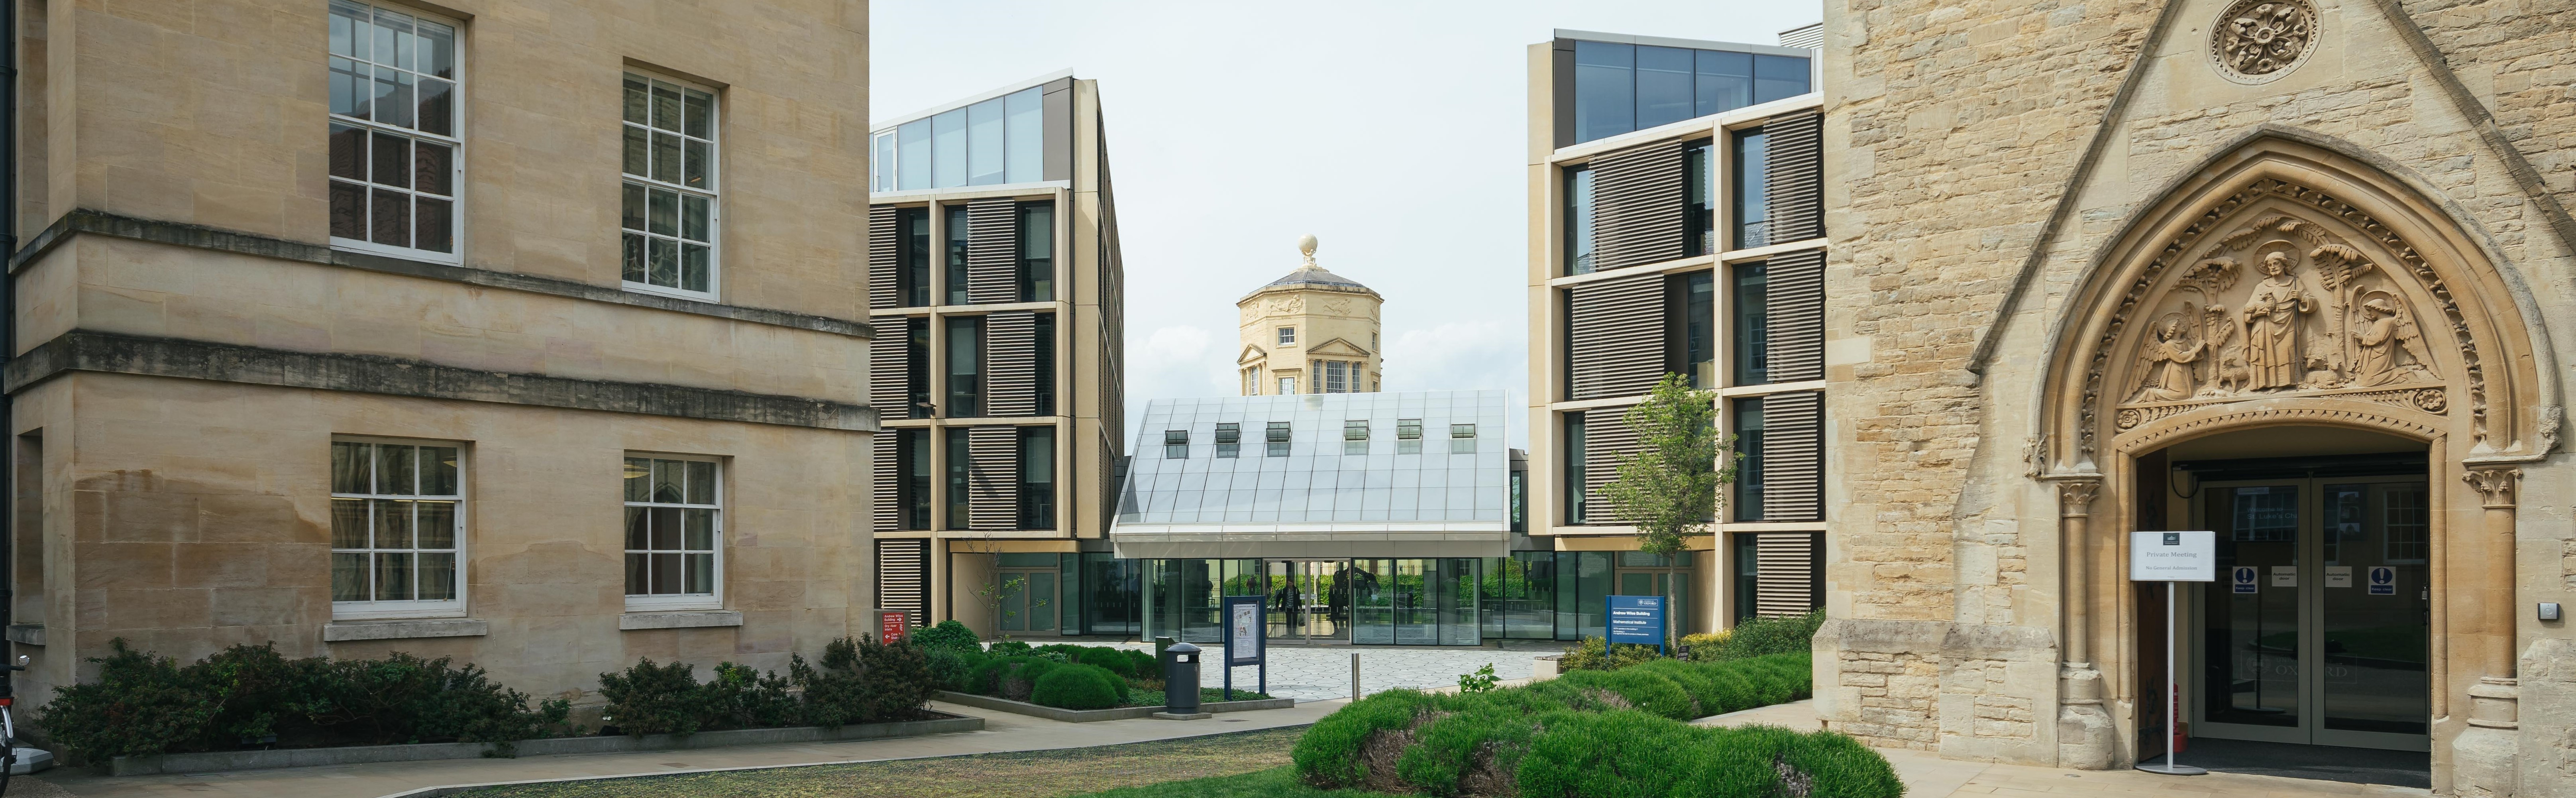 photograph of The Maths Institute, Oxford University